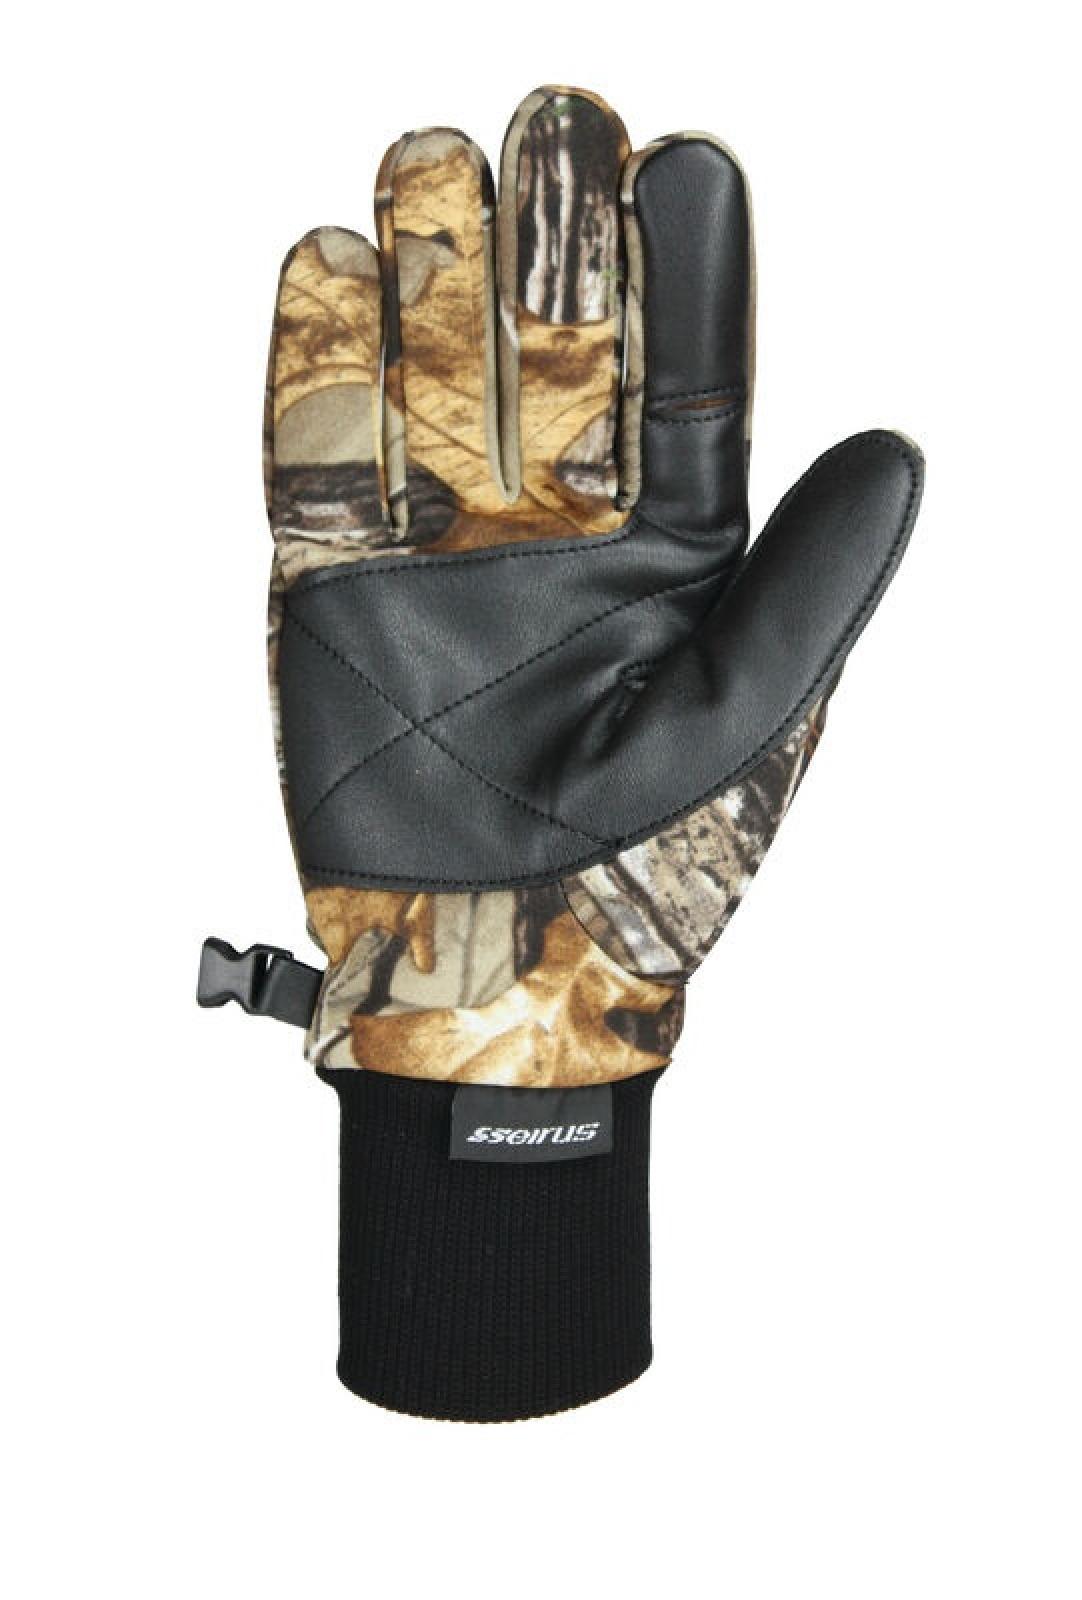 Seirus Soundtouch All Weather Realtree Glove